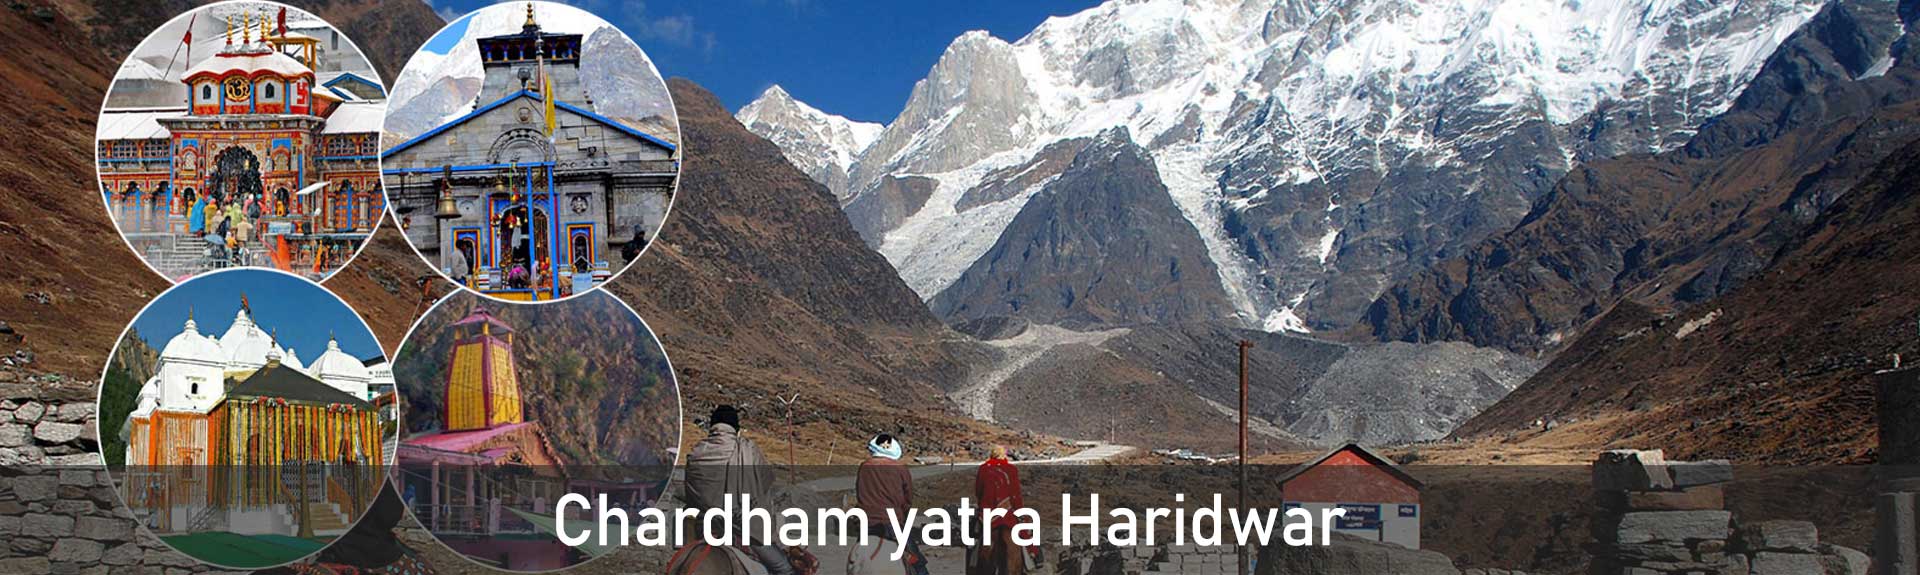 Best Chardham tour package